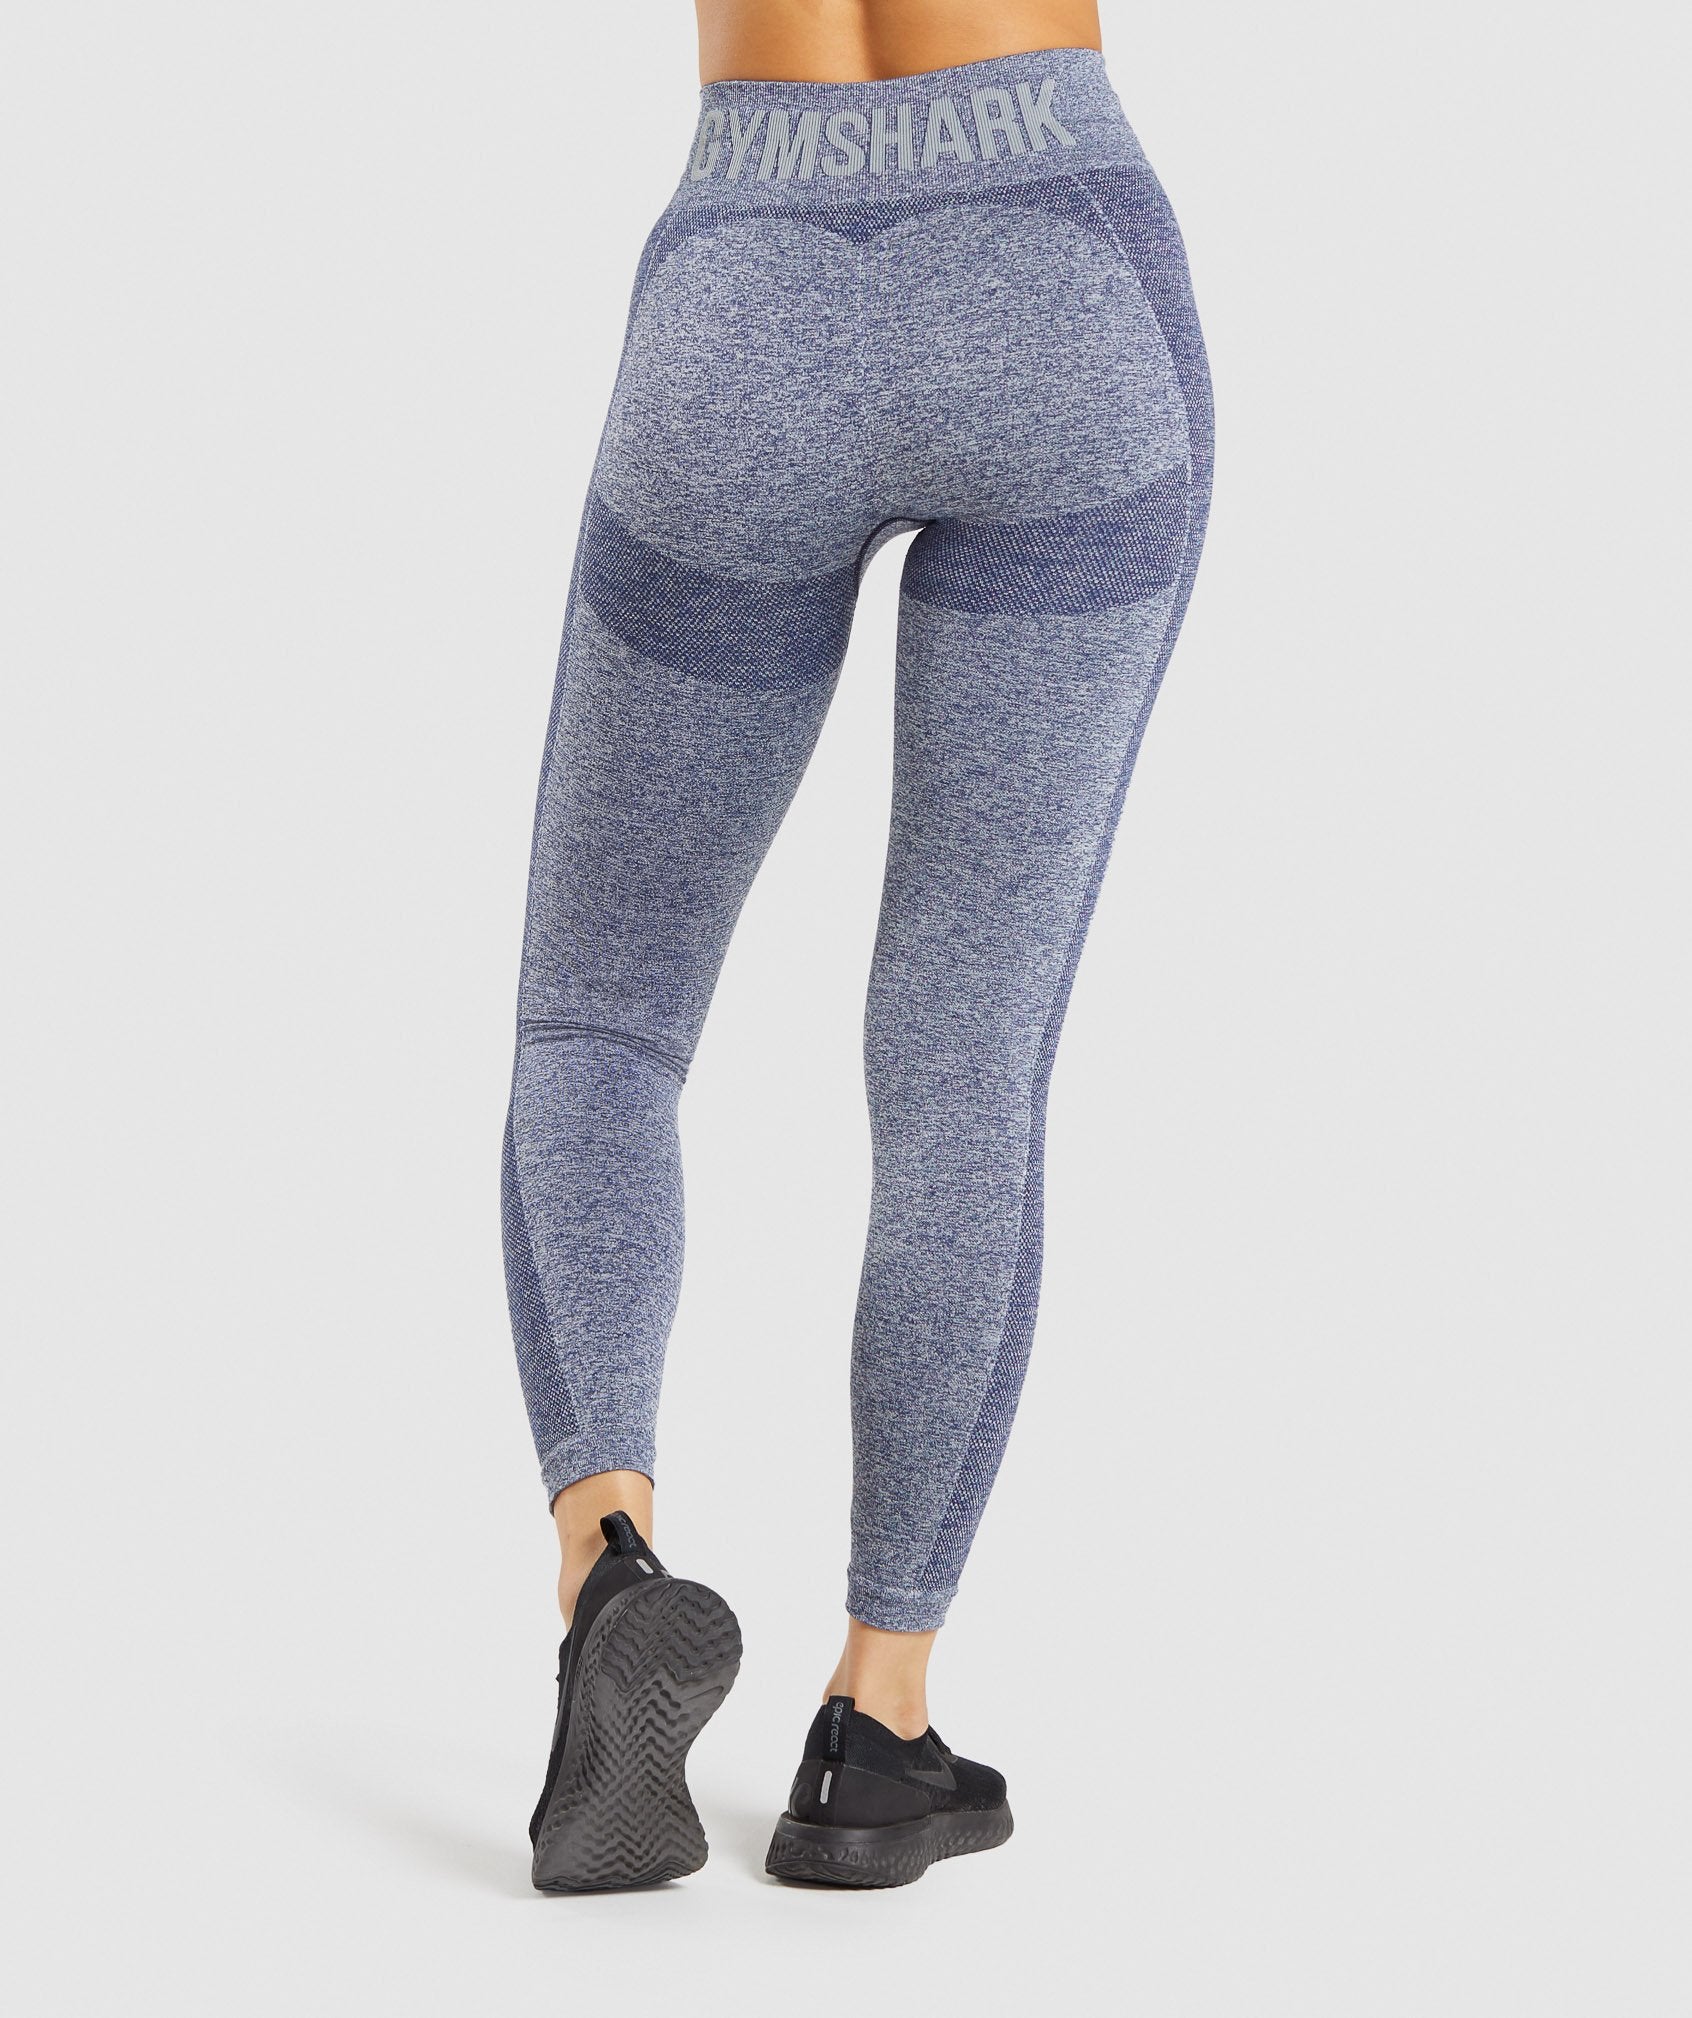 GYMSHARK FLEX HIGH WAISTED LEGGINGS— have these and love them, the